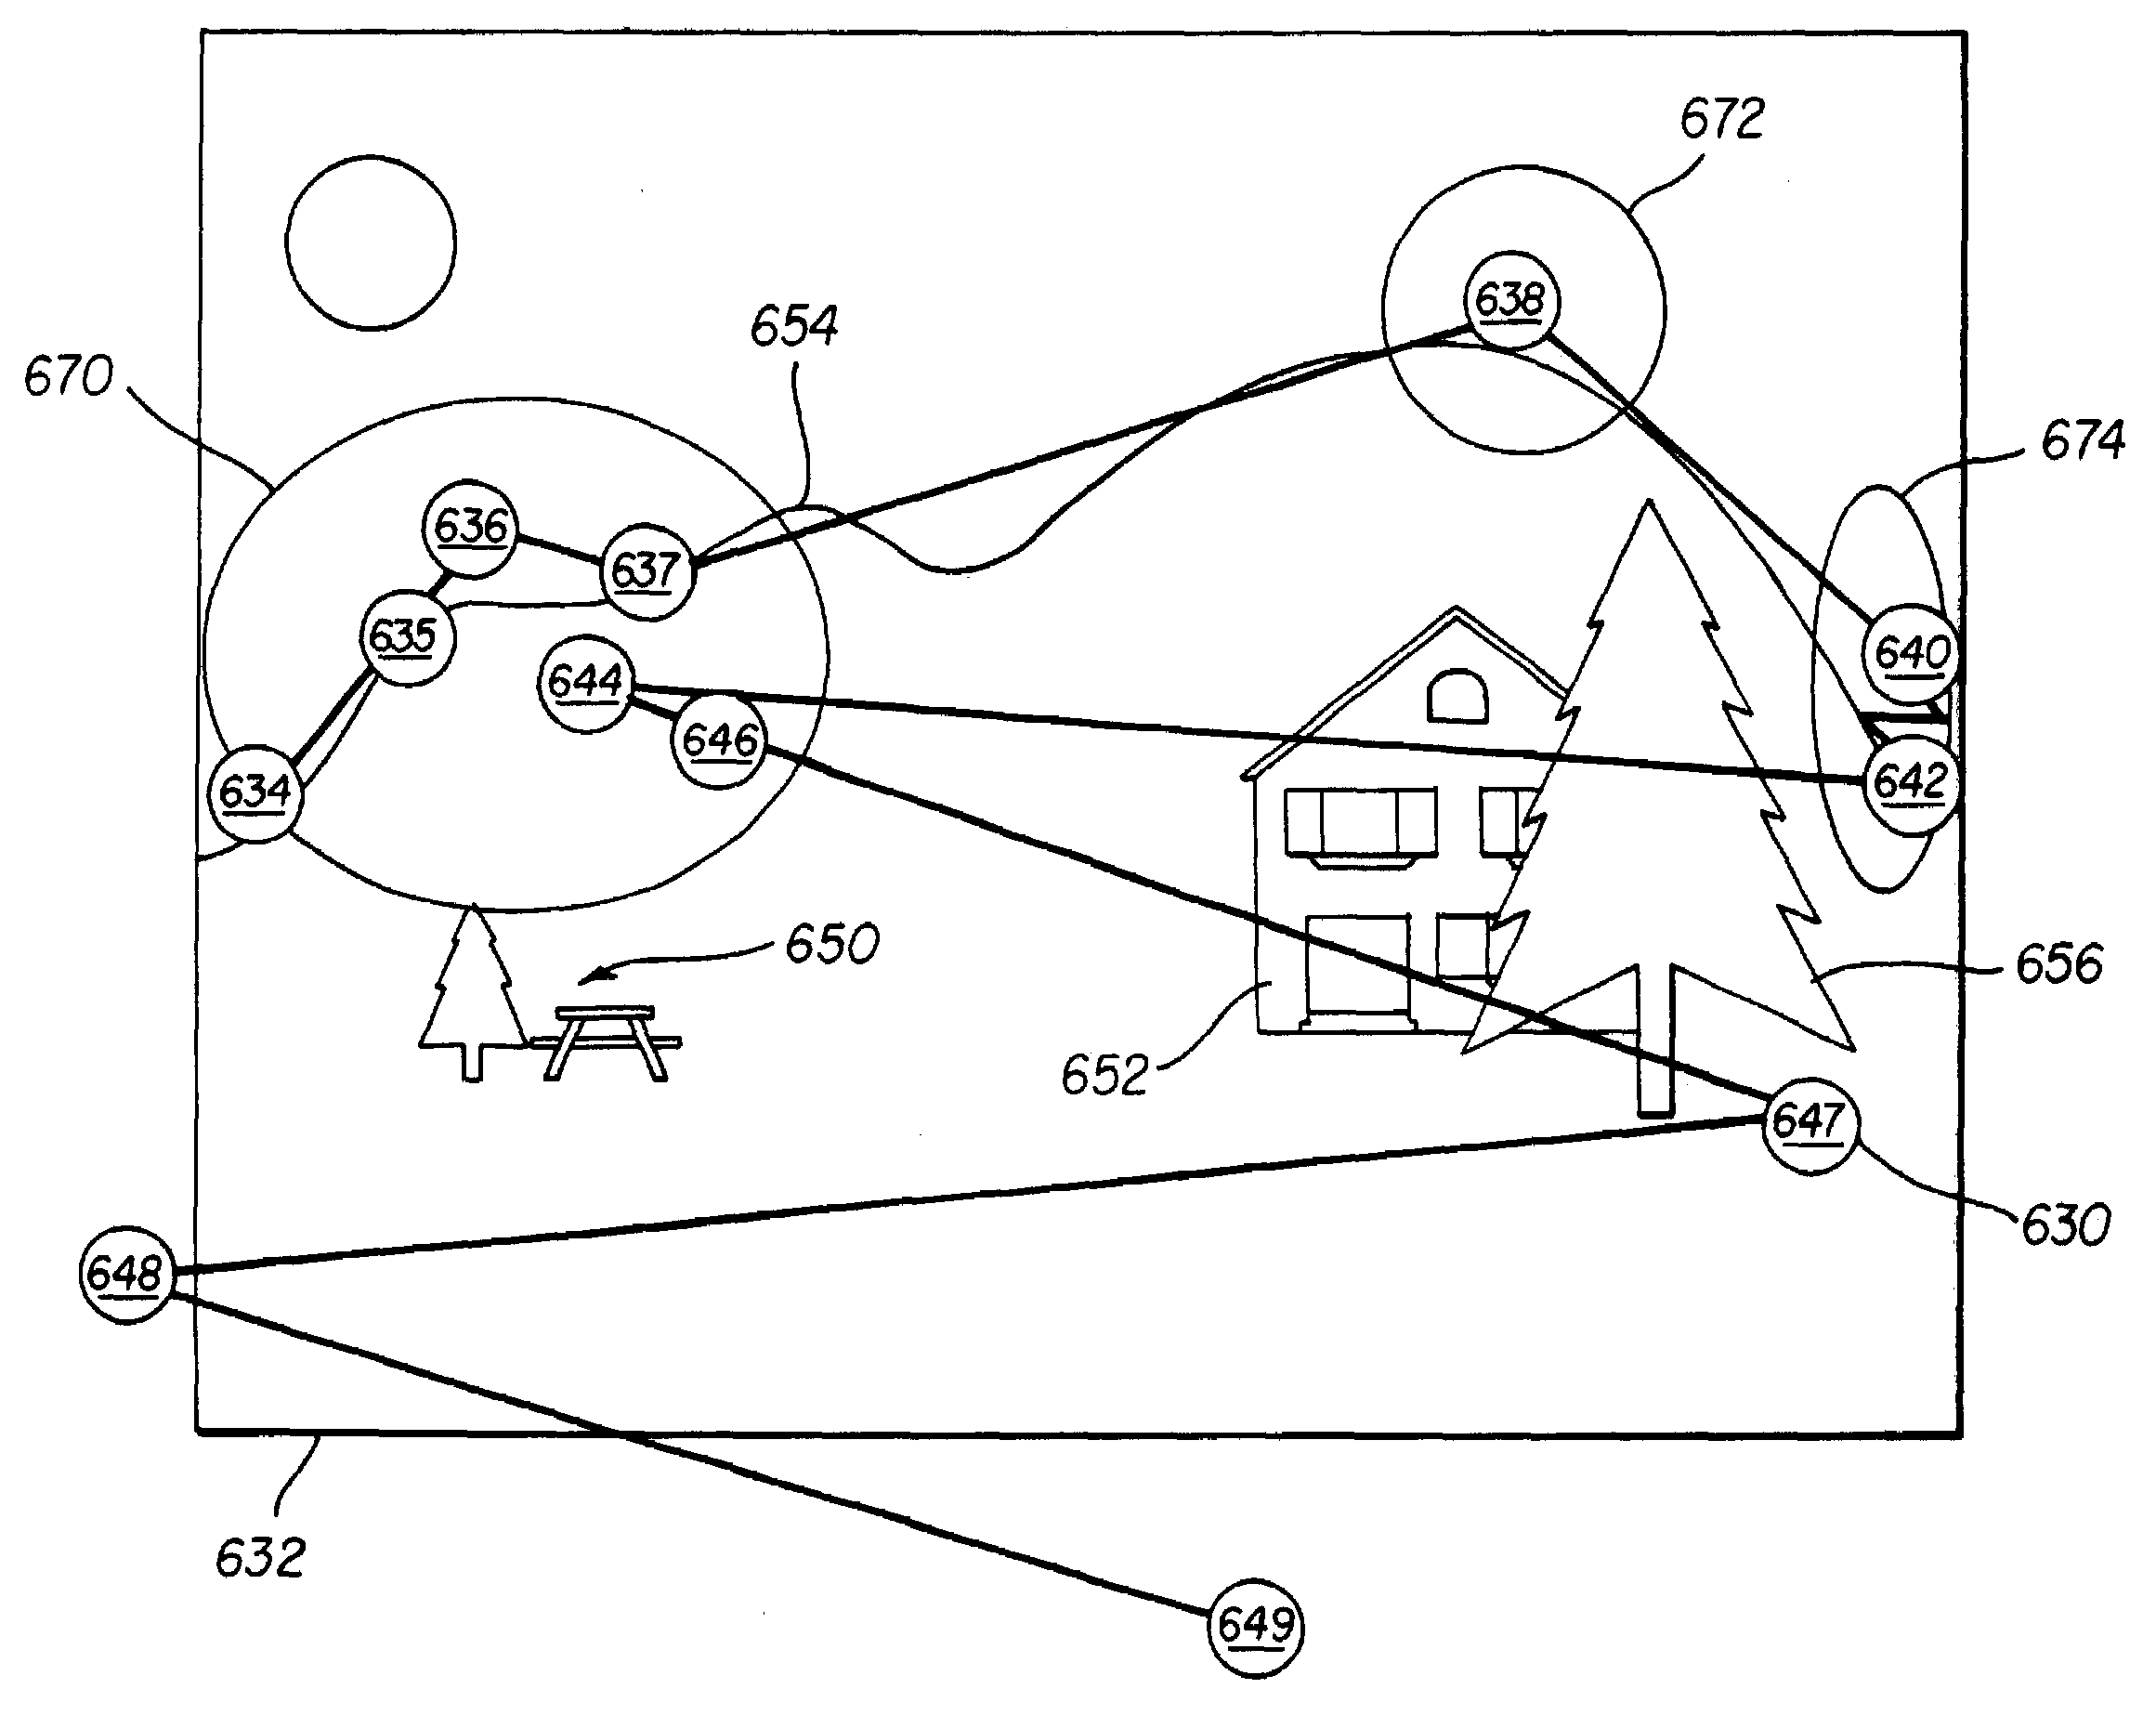 Method and computer program product for determining an area of importance in an image using eye monitoring information